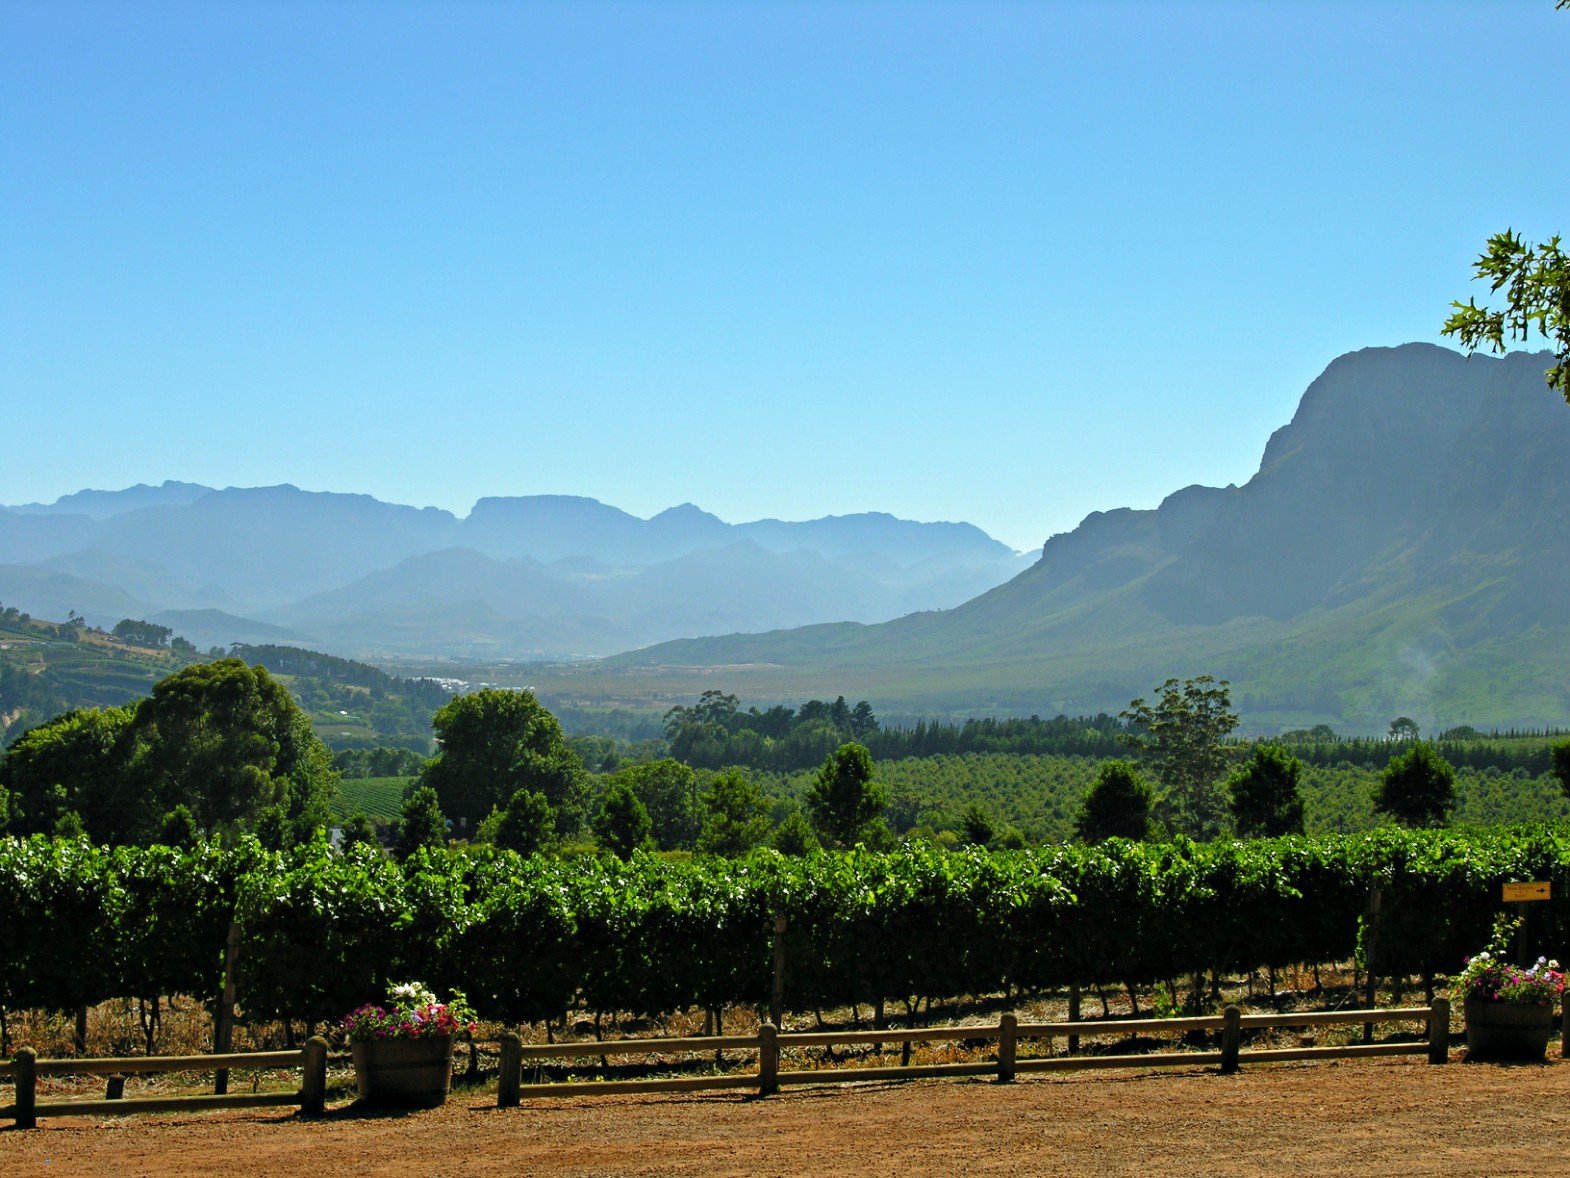 cape-town-winelands-stellenbosch-vineyards-and-mountain-range-scenic-beauty-wine-tasting-packages-program-holiday-vacation-things-to-do-in-cape-town-experience.jpg